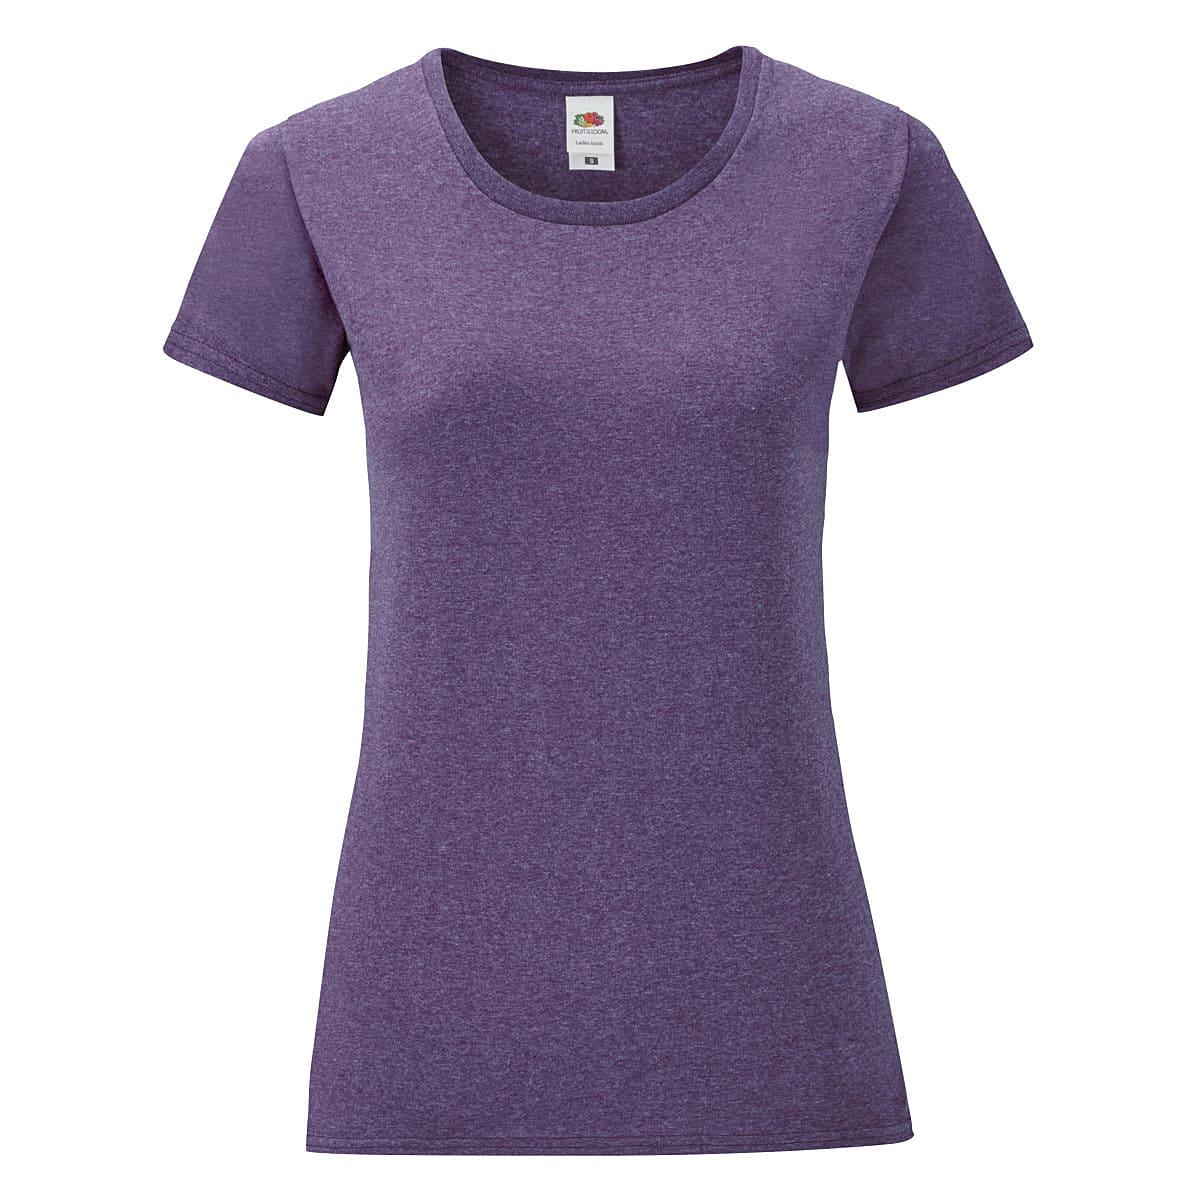 Fruit Of The Loom Womens Iconic T-Shirt in Heather Purple (Product Code: 61432)